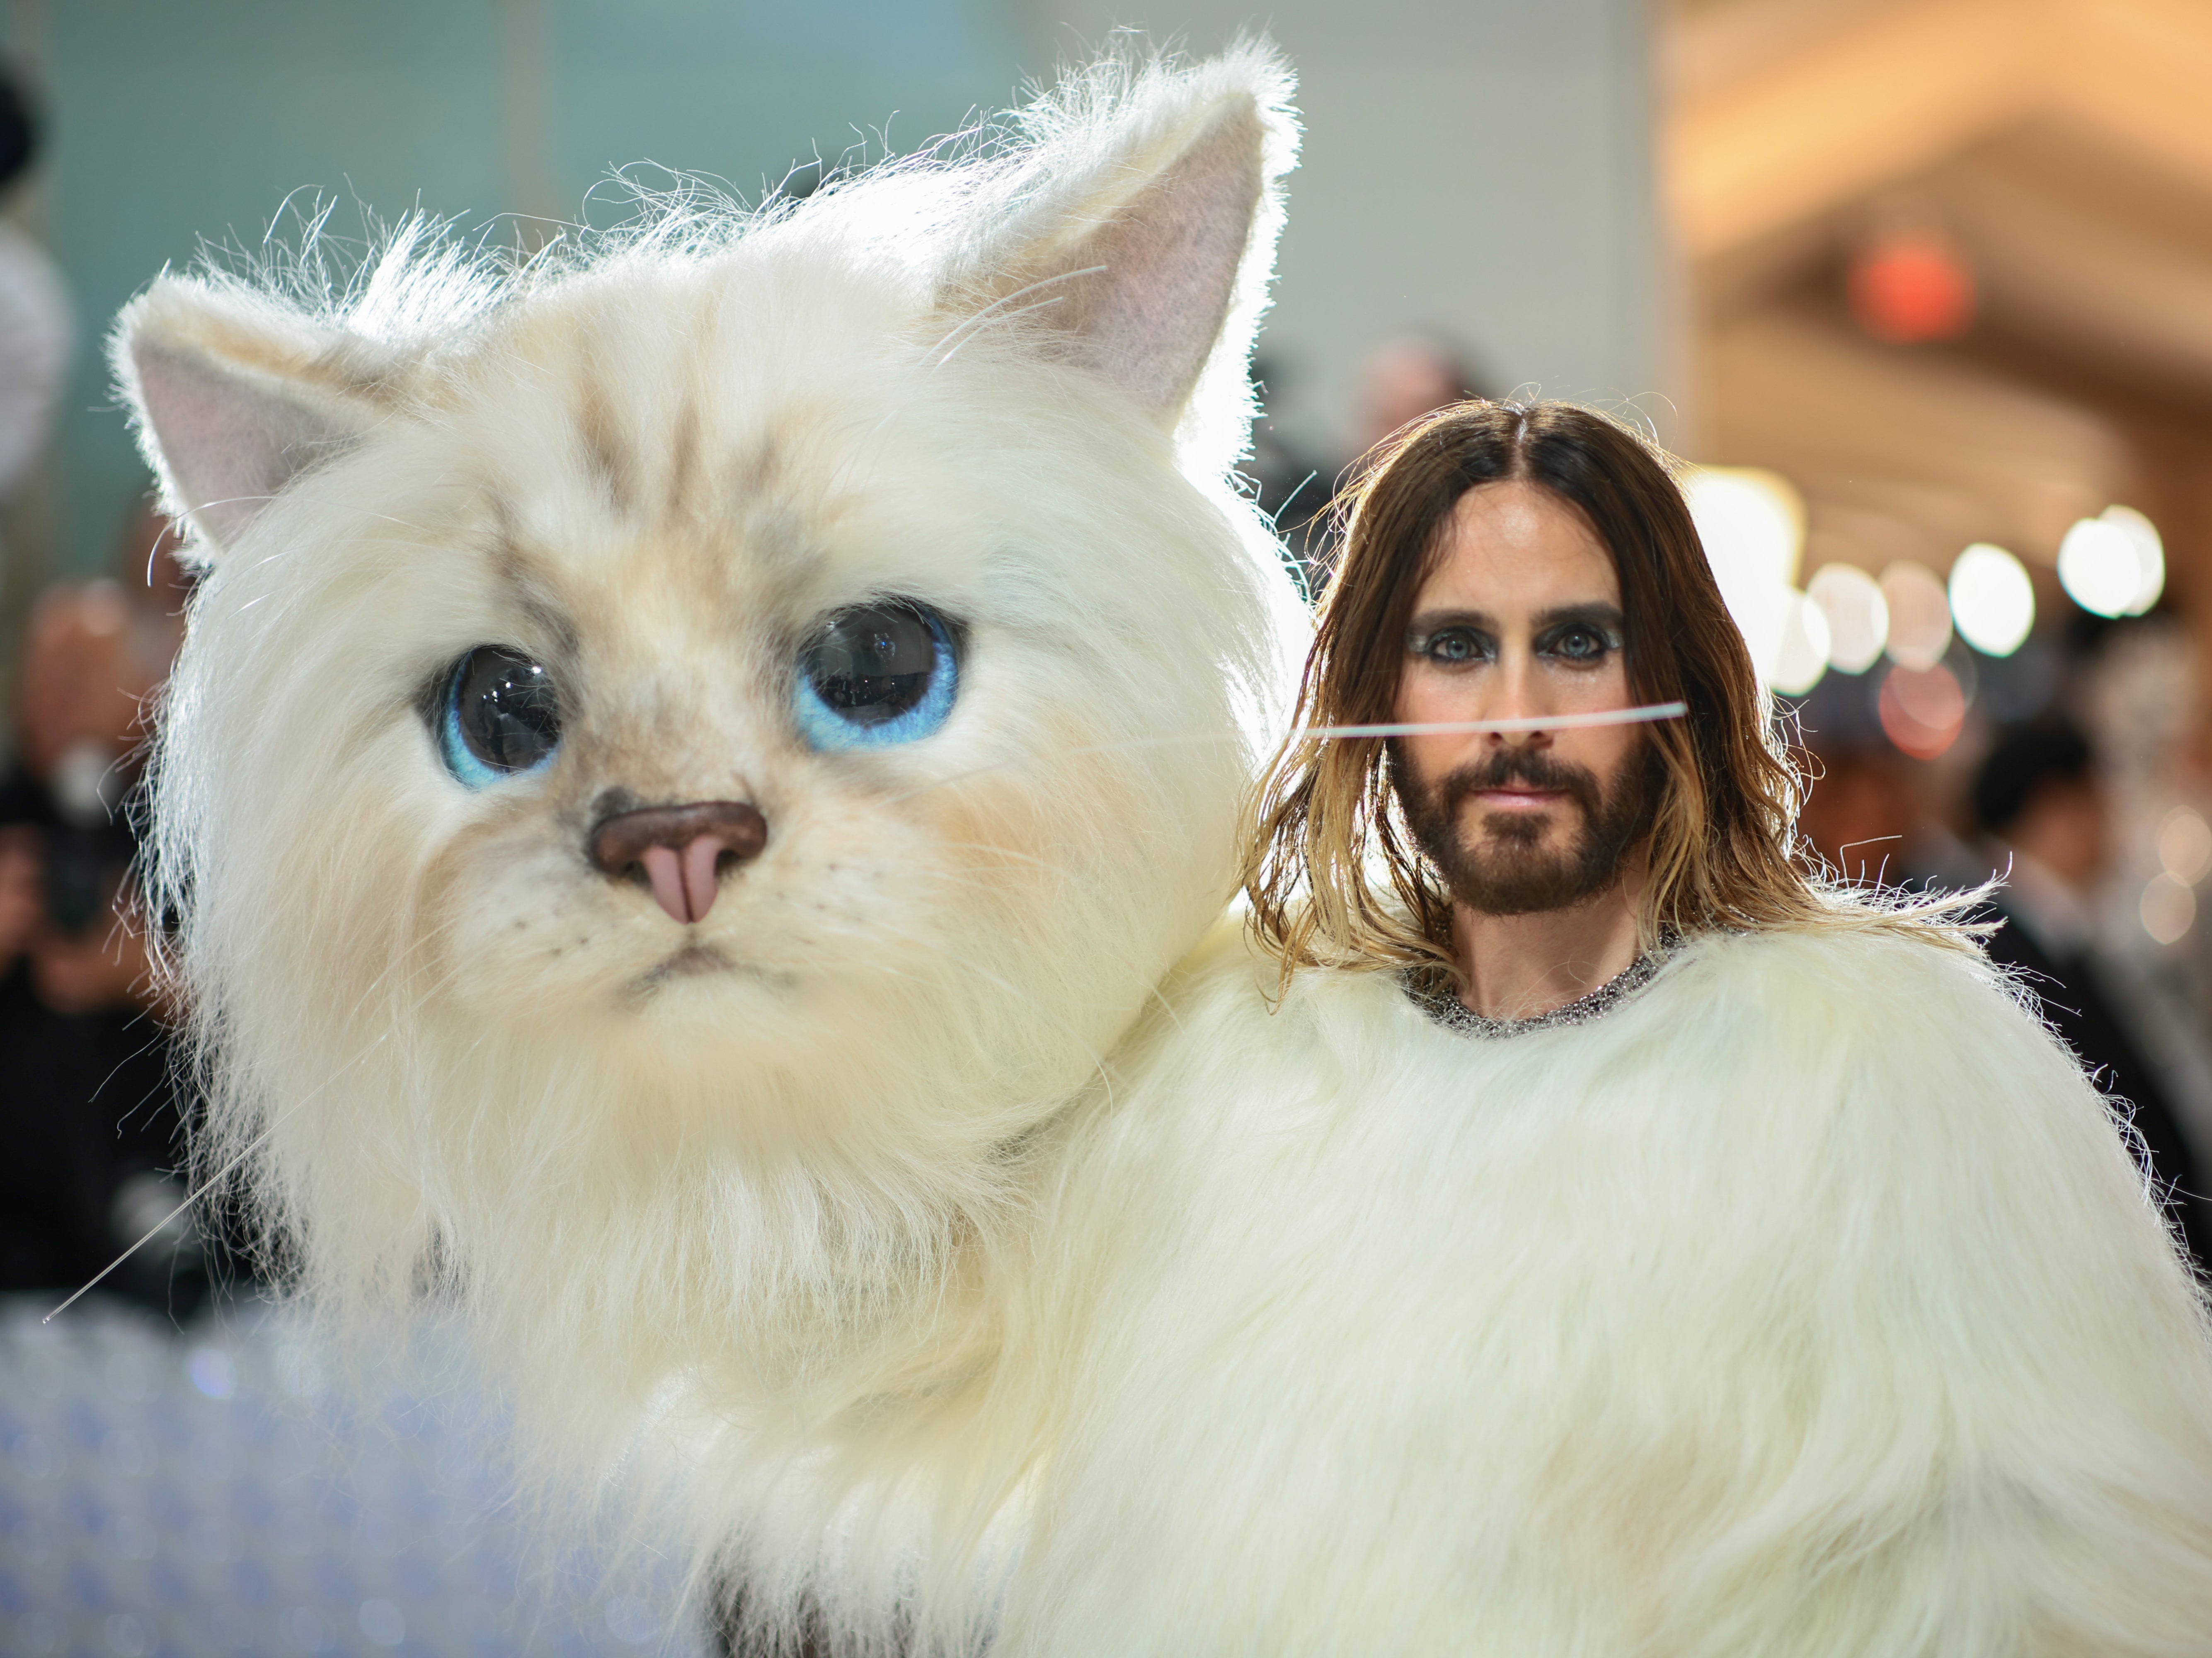 Jared Leto in an outfit inspired by Karl Lagerfield’s cat Choupette